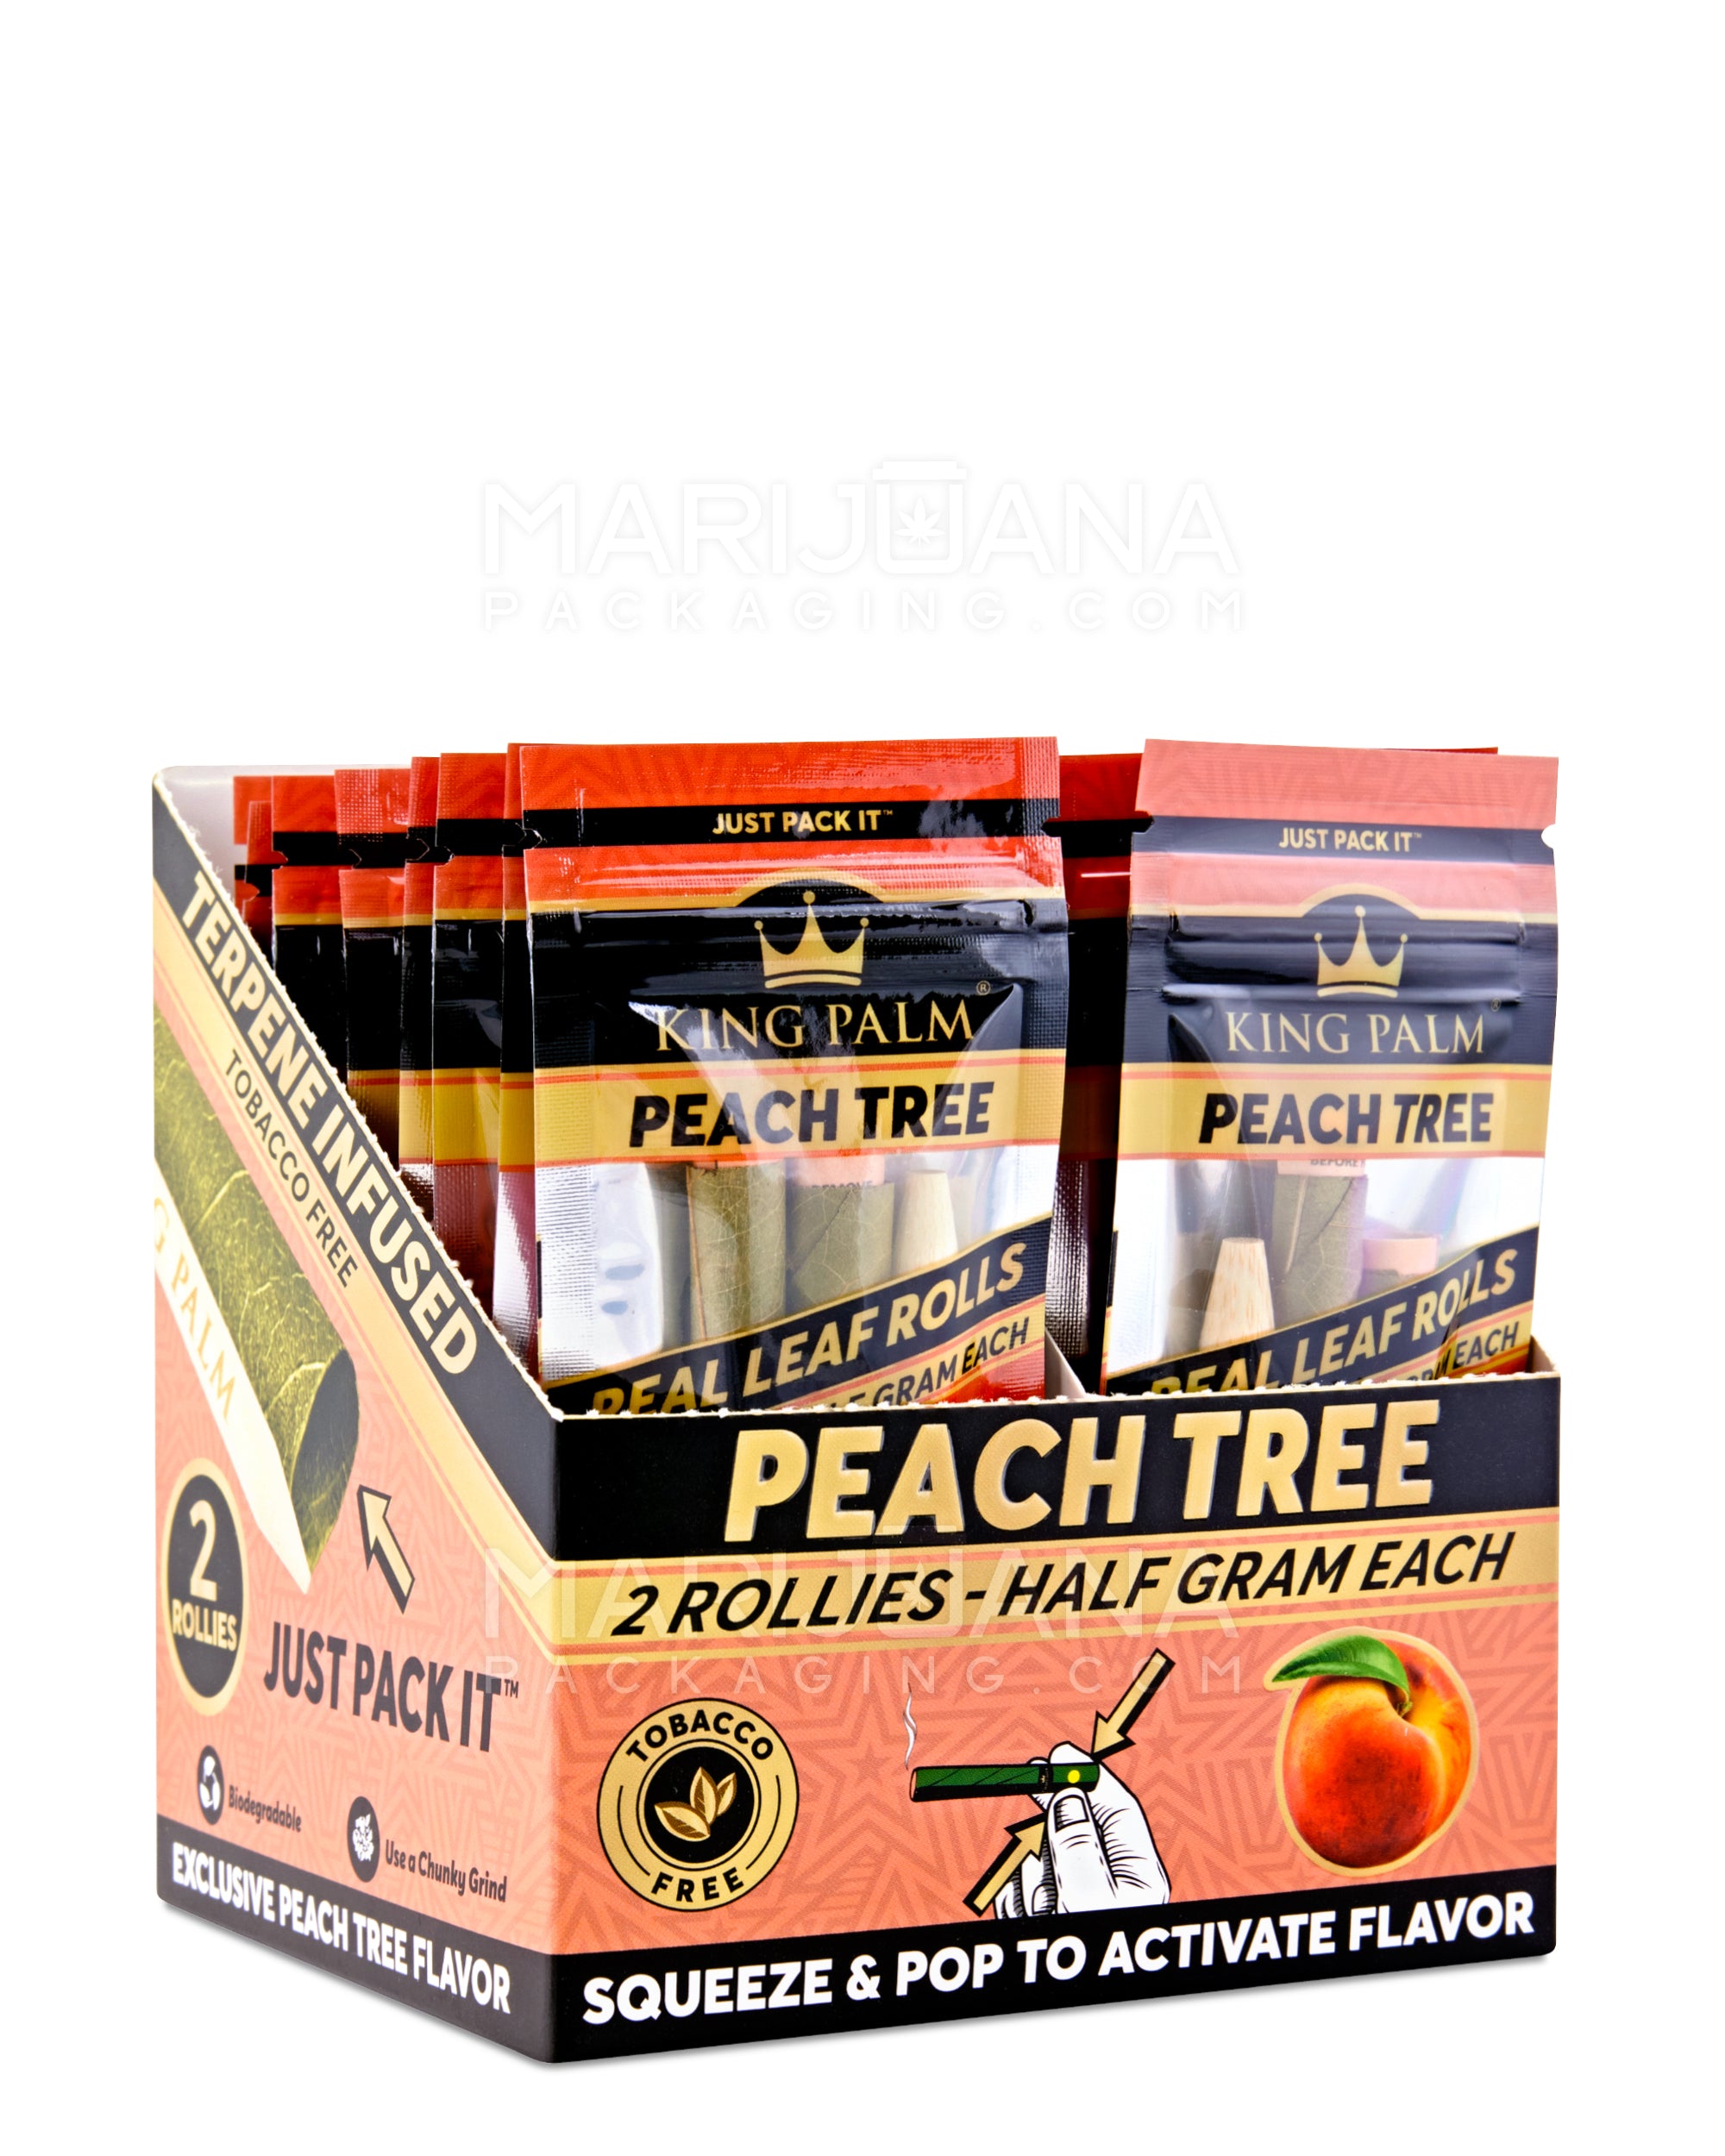 KING PALM | 'Retail Display' Rollie Green Natural Leaf Blunt Wraps | 54mm - Peach Tree - 20 Count